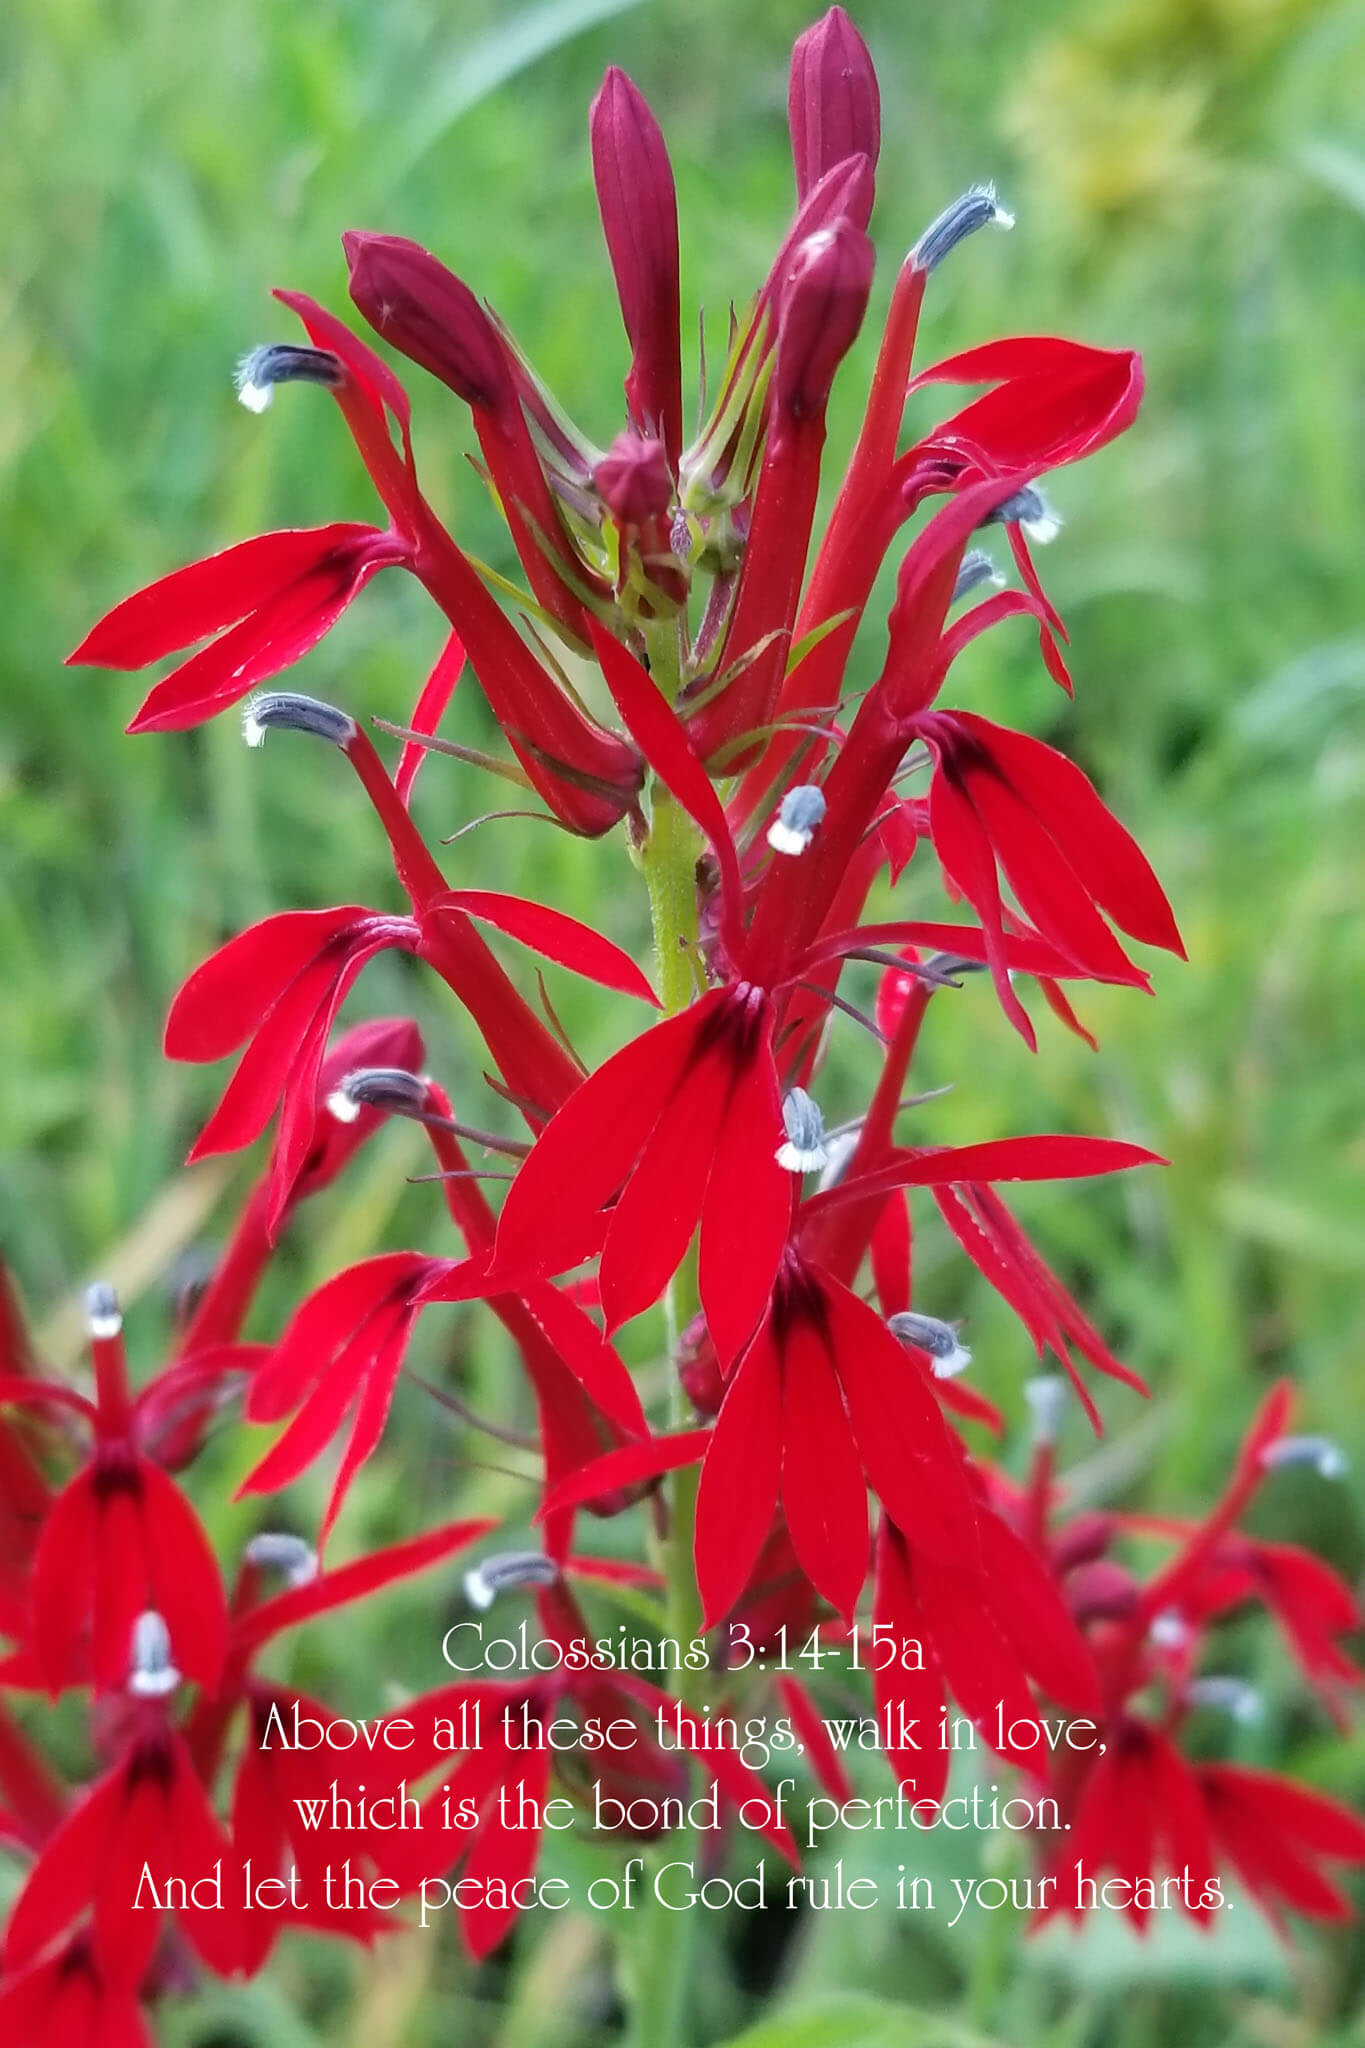 Colossians 3:14-15a on a photo of a Cardinal flower in a Christian greeting card